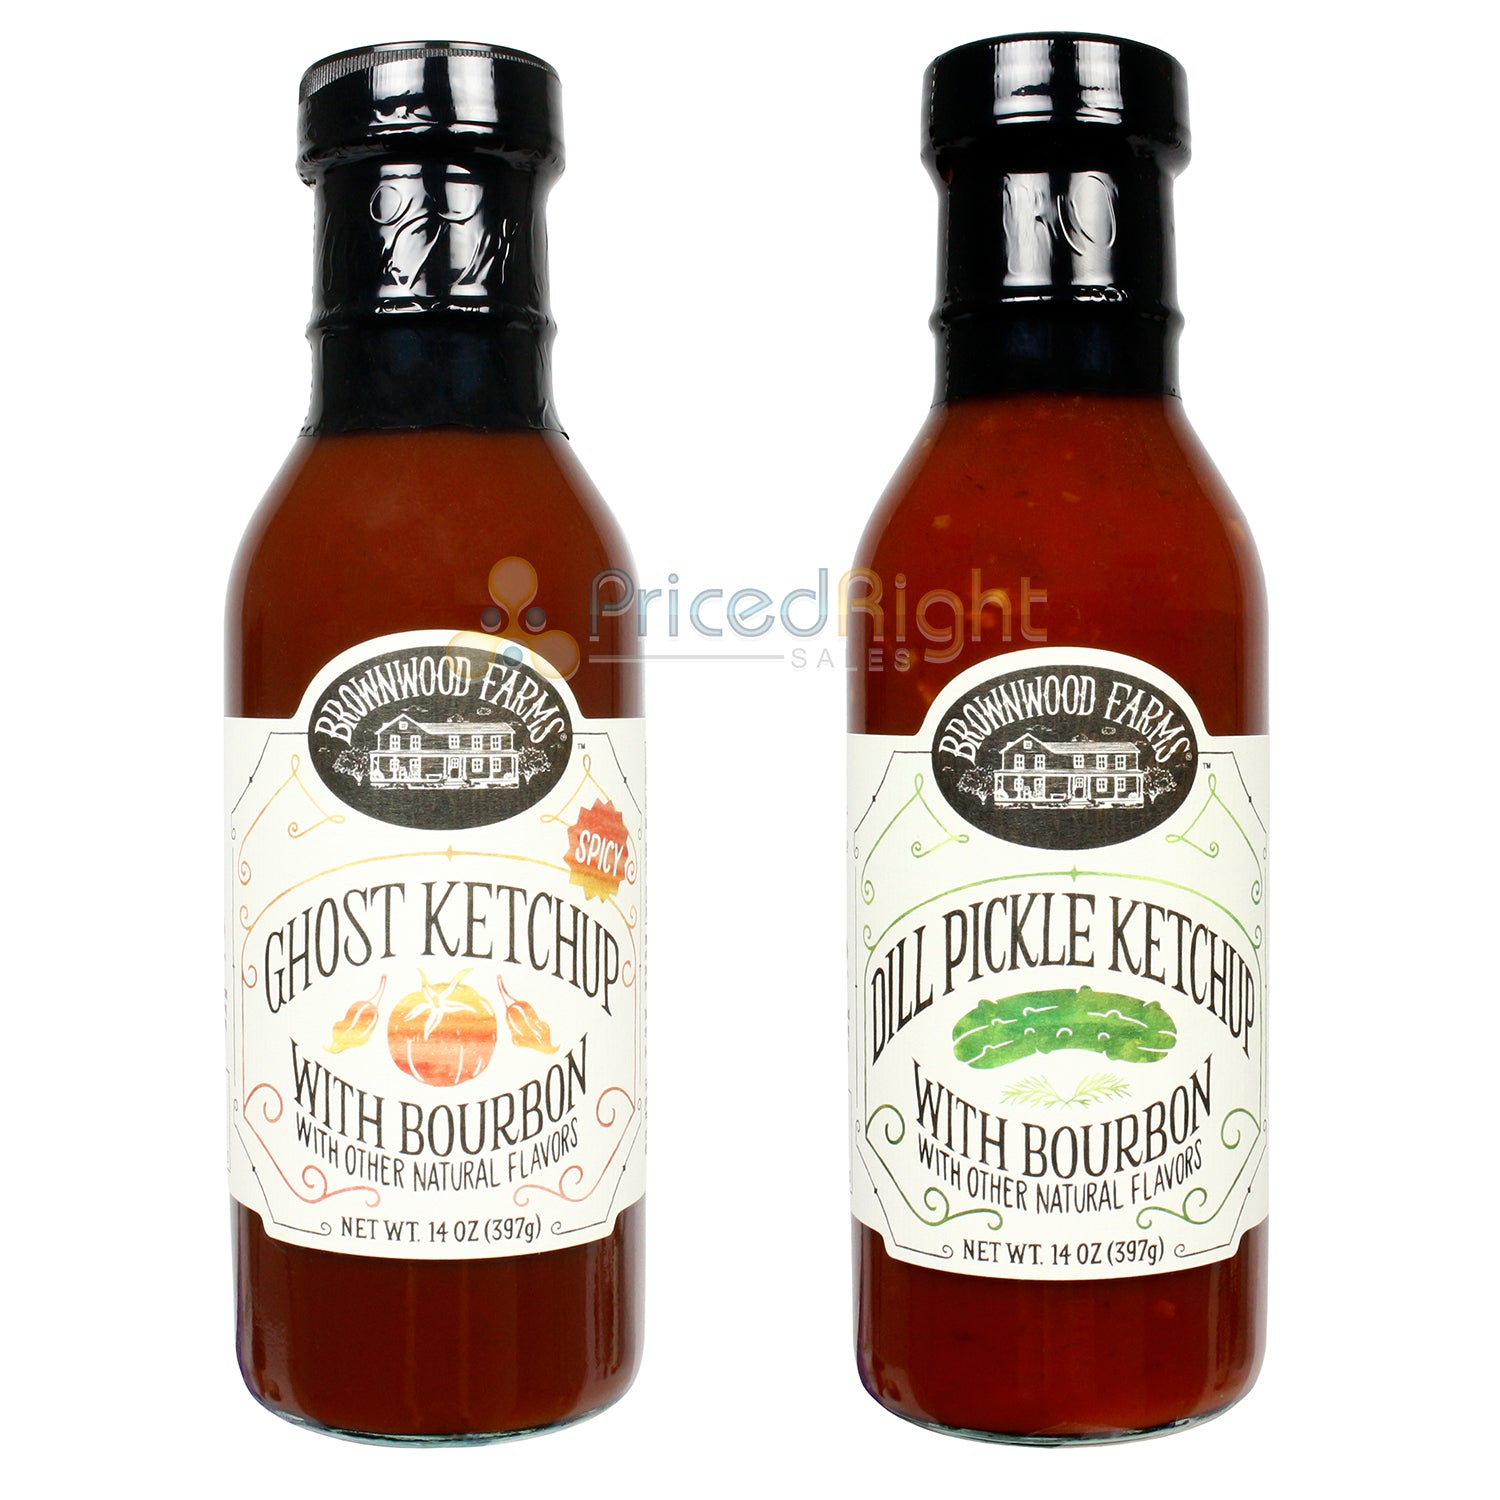 Brownwood Farms Dill Pickle Ketchup/Spicy Ketchup 2-Pack Farm Fresh 14oz Bottles